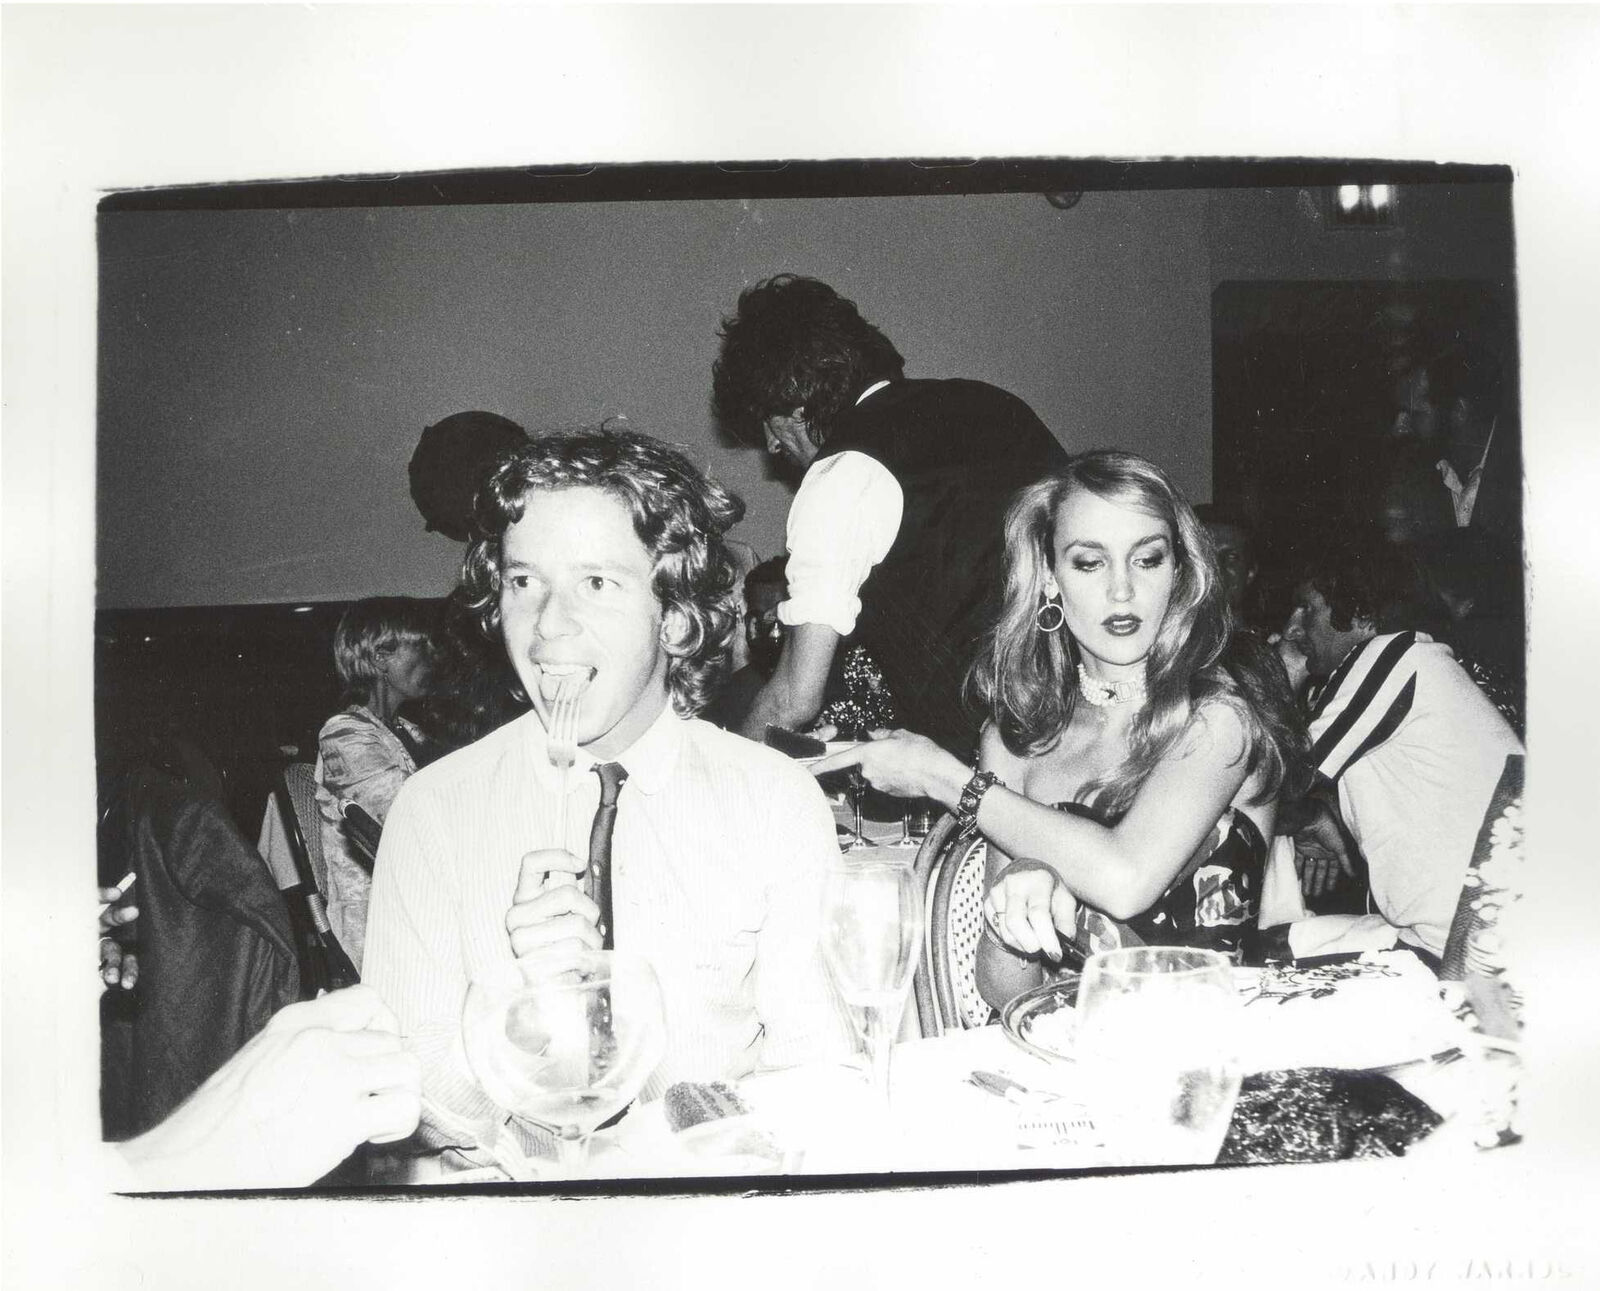 Andy Warhol Original Photograph of Jerry Hall and Keith Richards taken at Studio